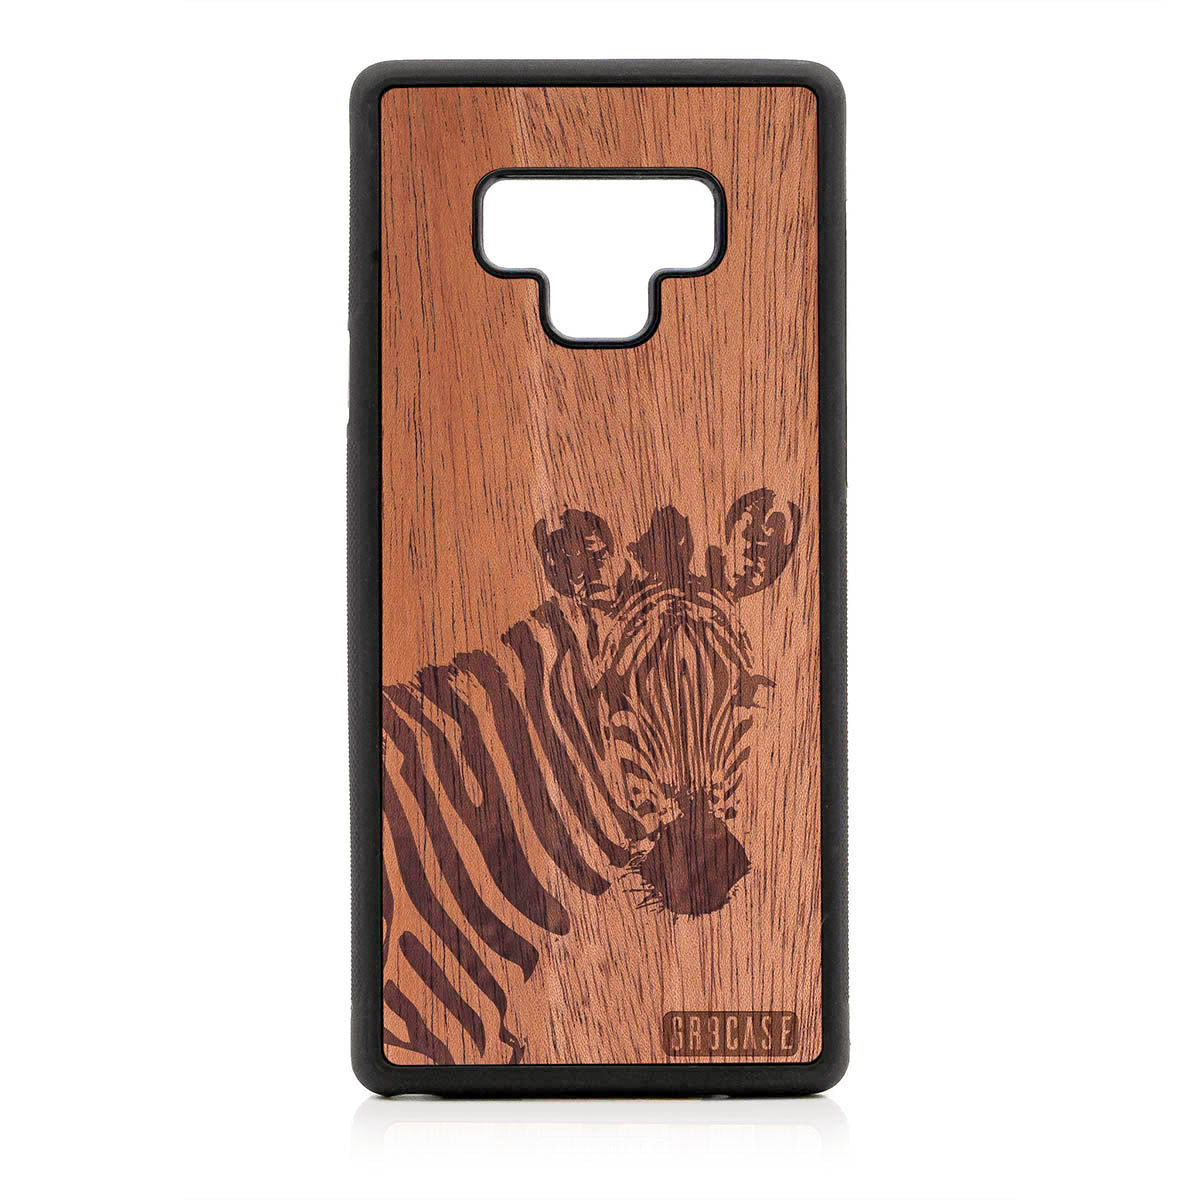 Lookout Zebra Design Wood Case For Samsung Galaxy Note 9